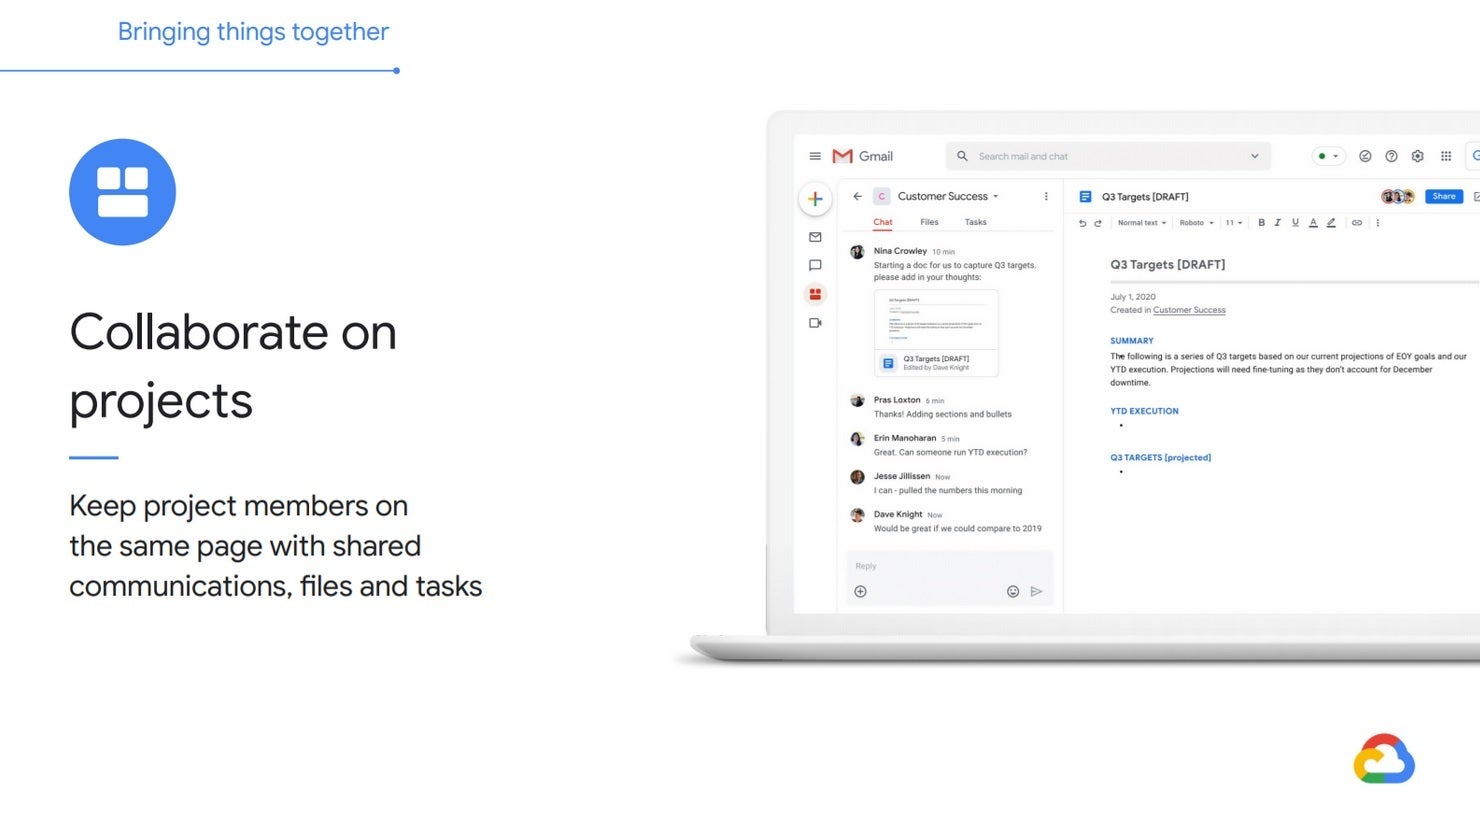 Gmail users can work together on projects from remote locations - Gmail redesign brings changes perfect for the times